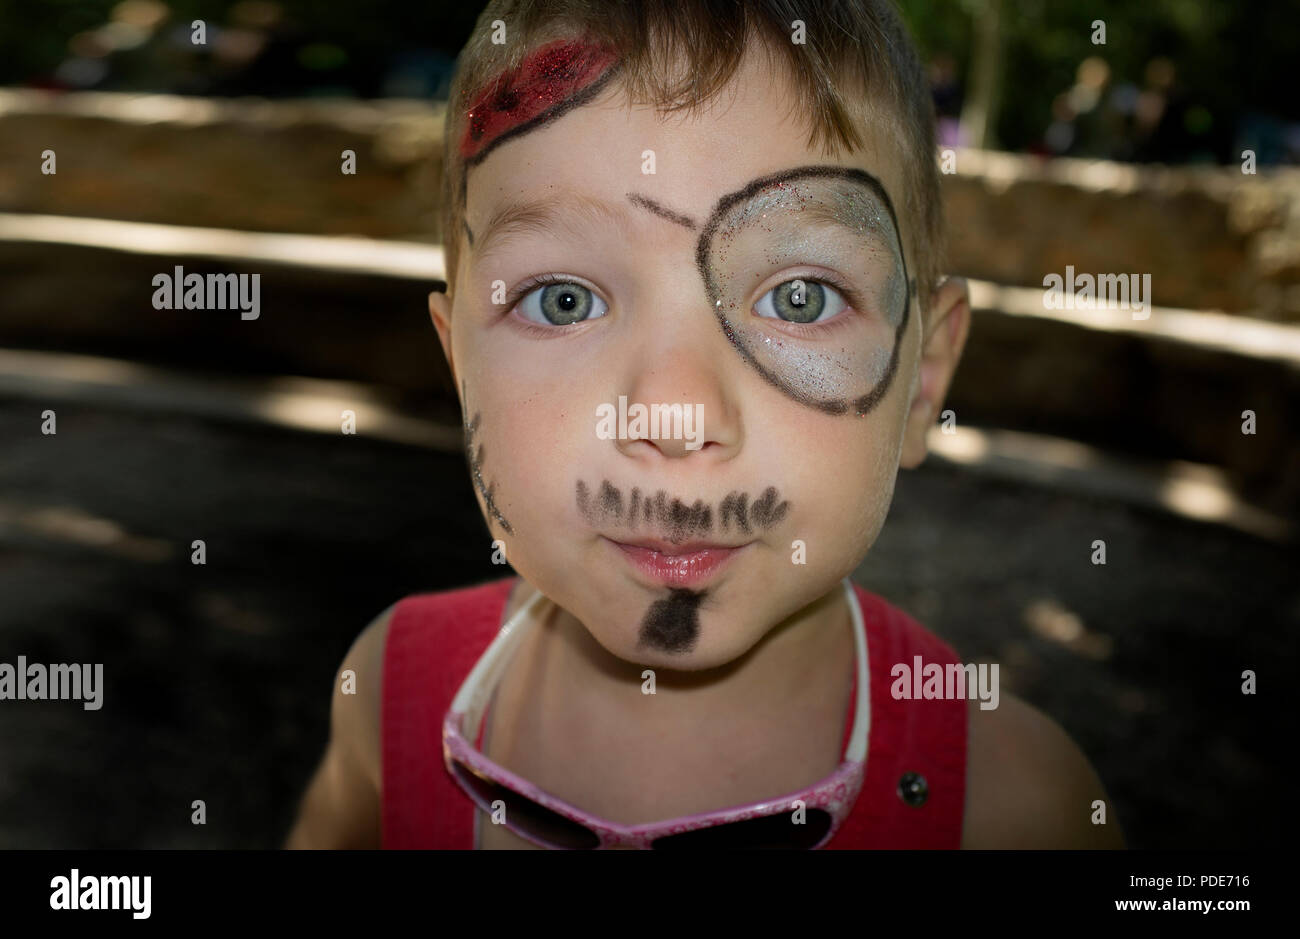 Little boy with face painted during outdoors party. Portrait Stock Photo